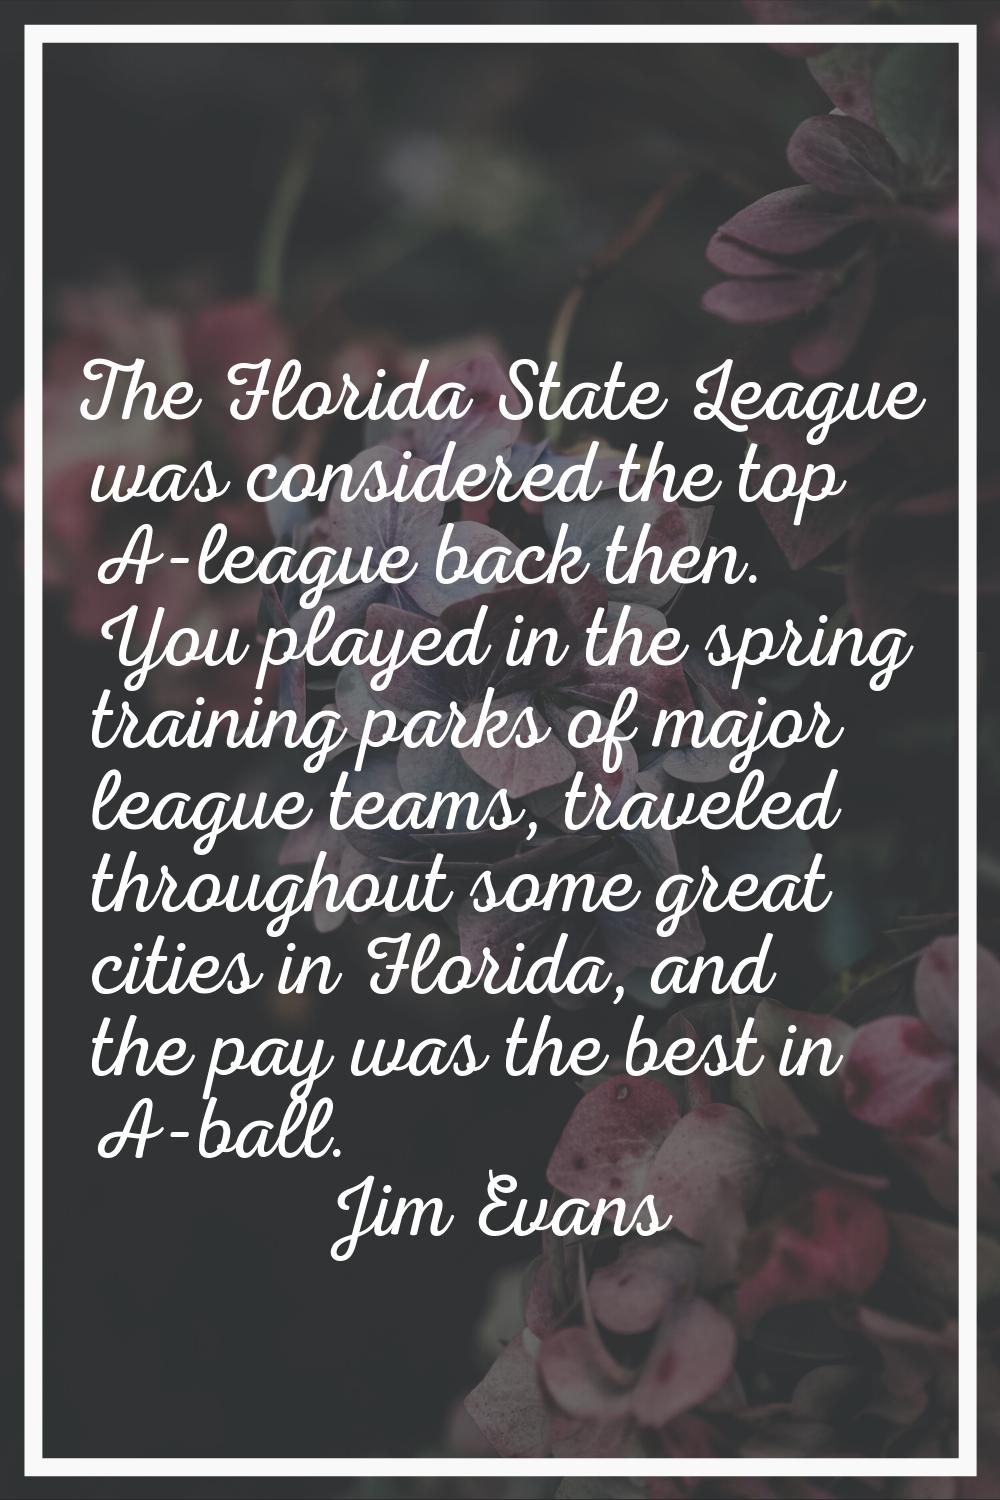 The Florida State League was considered the top A-league back then. You played in the spring traini